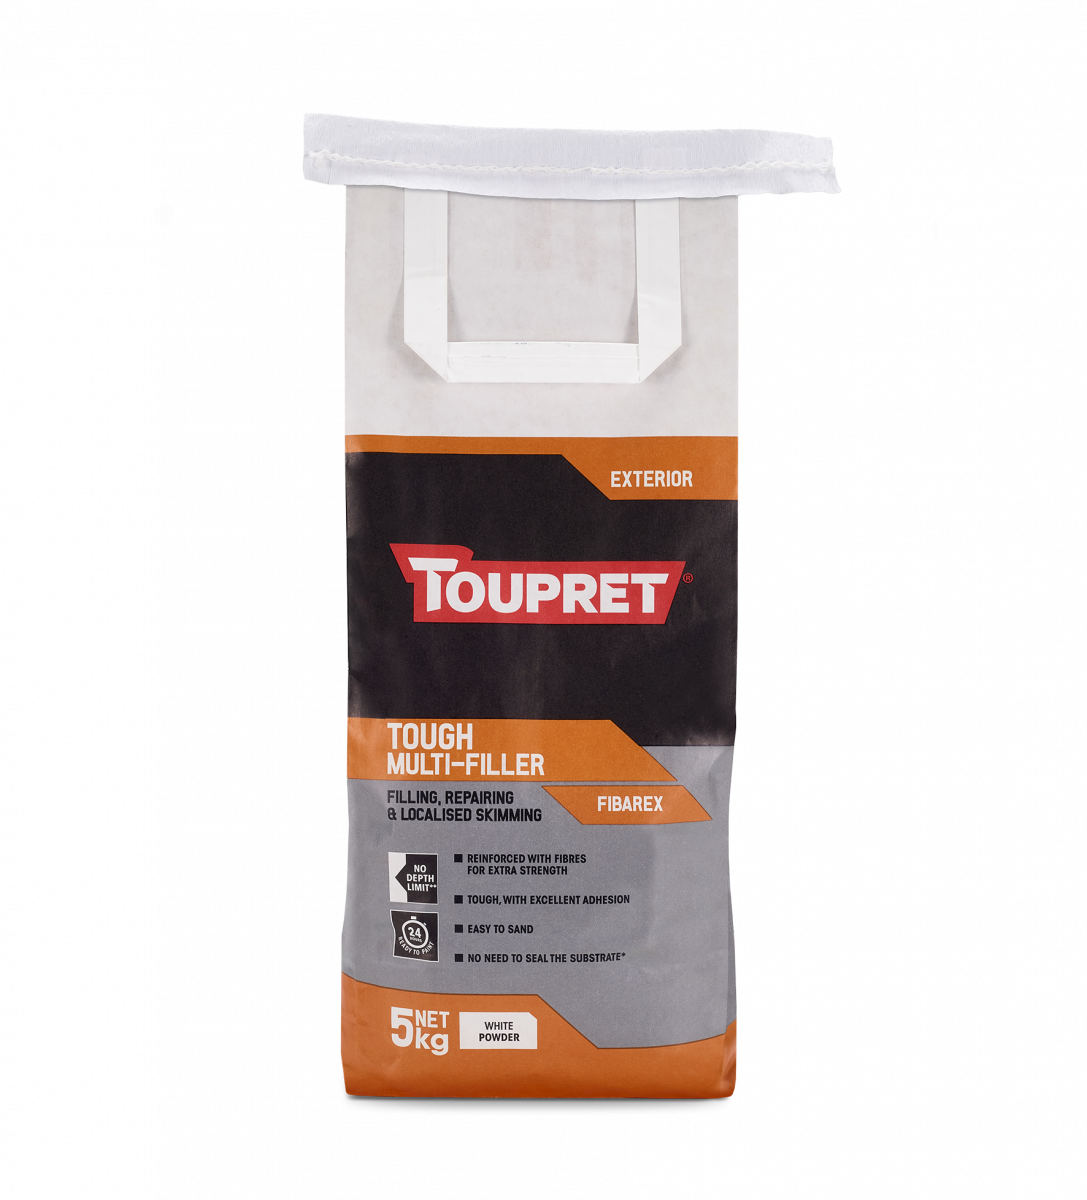 Tough Multi-Filler, Toupret’s hardworking product for pros